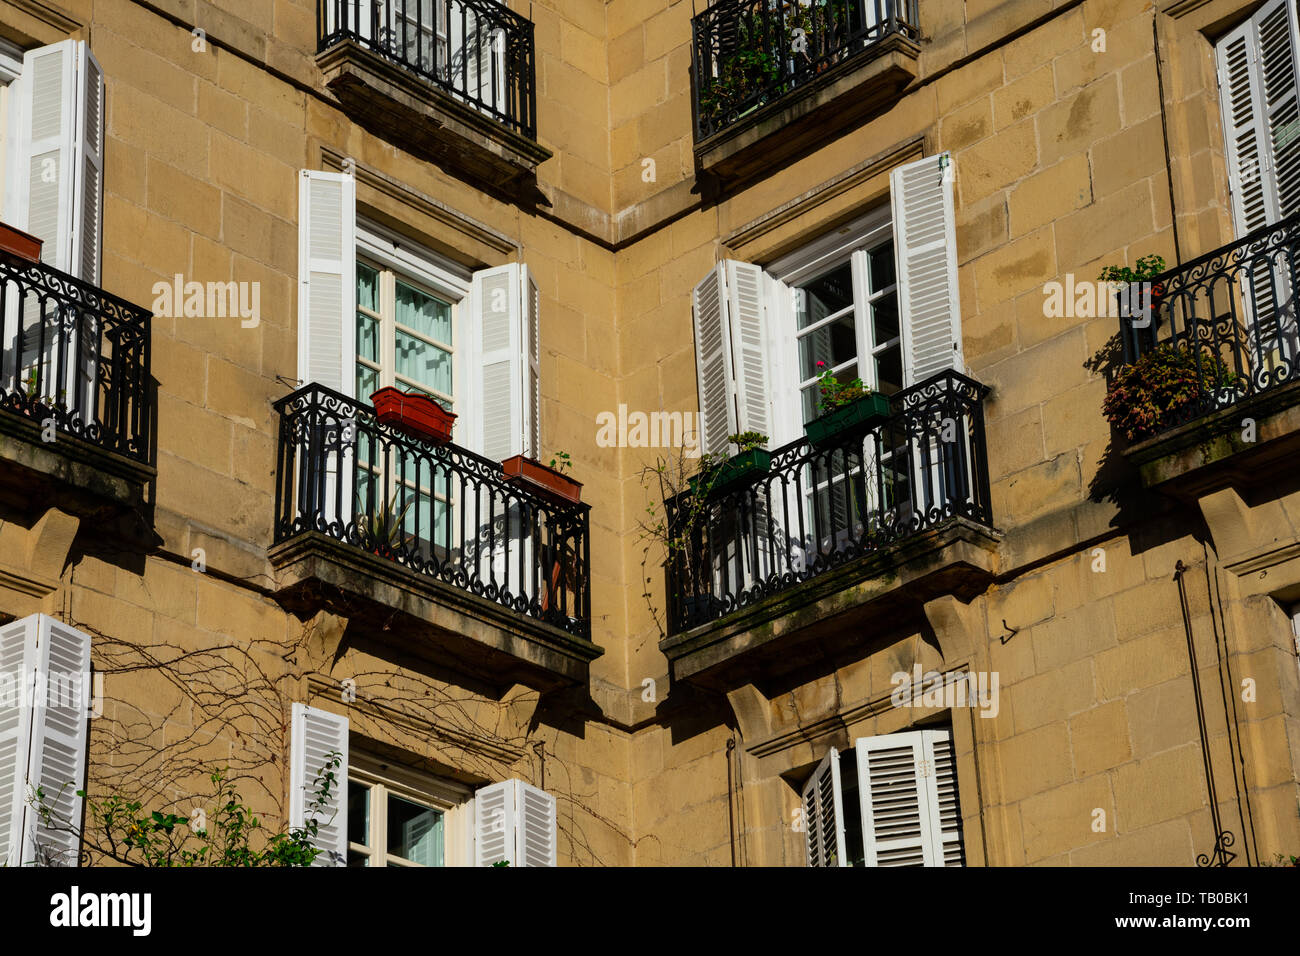 Building with balconies at The Plaza Nueva or Plaza Barria (New Square) of Bilbao, a monumental square of Neoclassical style built in 1821. Bilbao, Sp Stock Photo